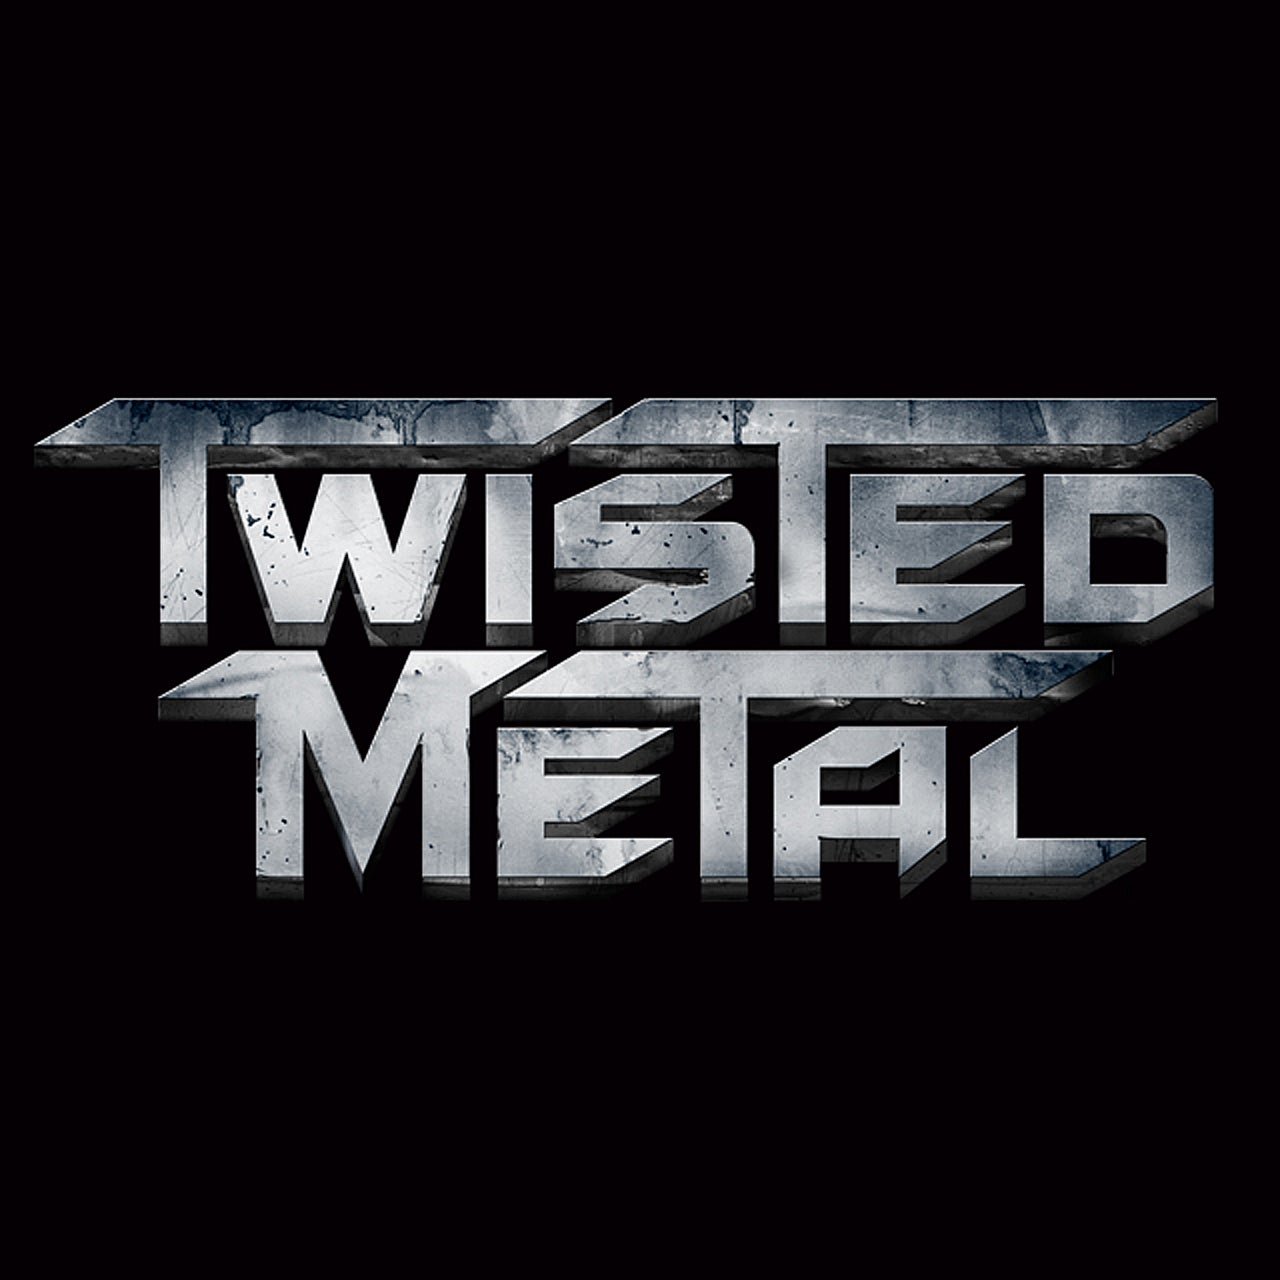 Everything you need to know about Twisted Metal: The Series.